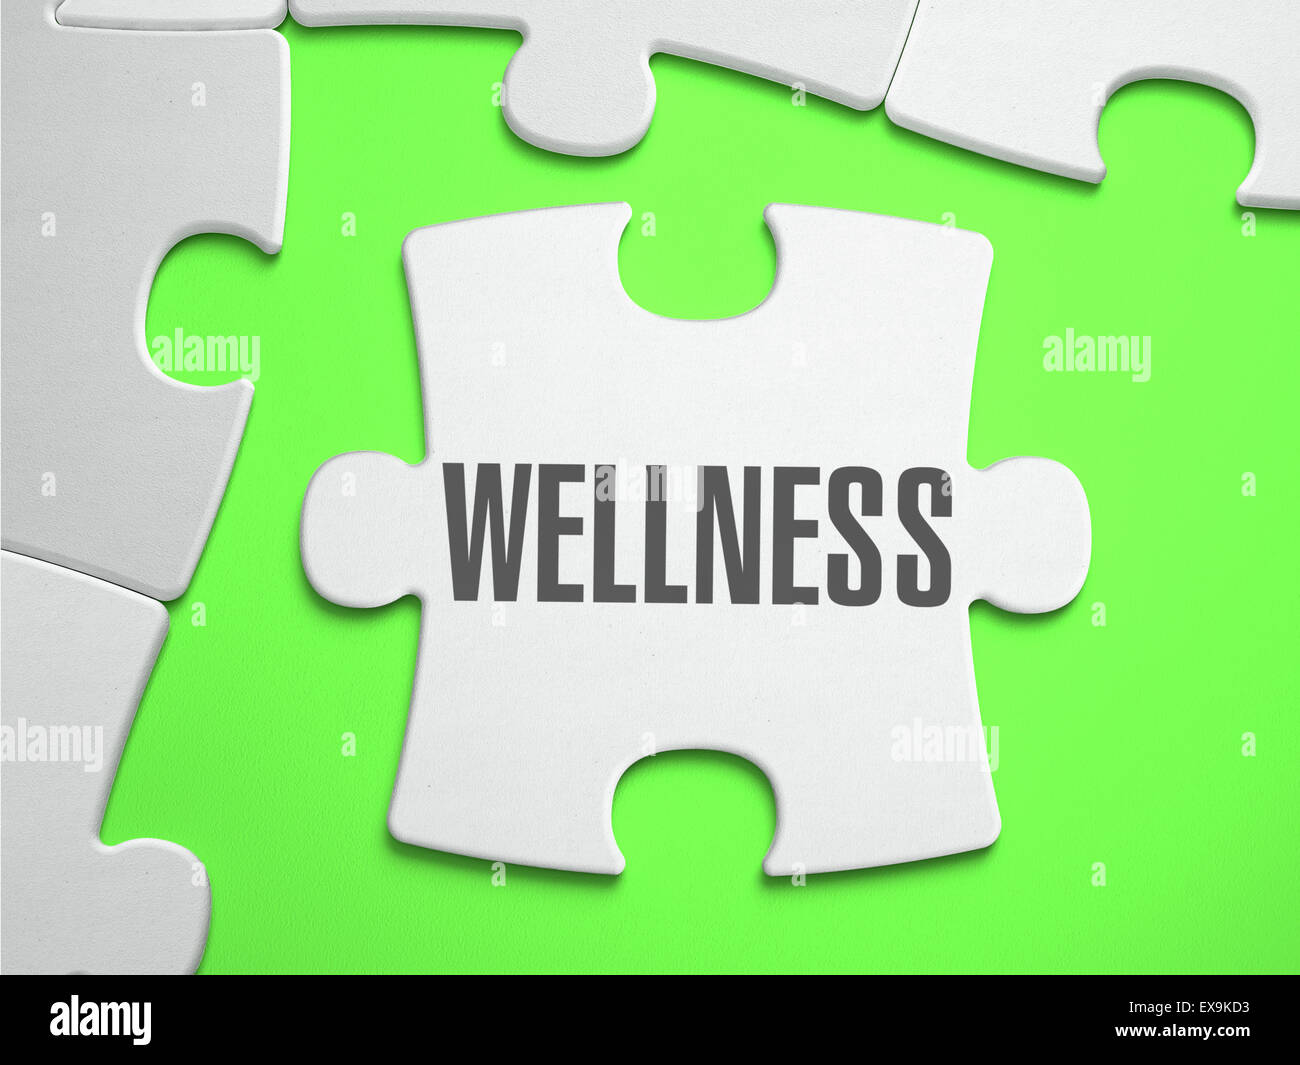 Wellness - Jigsaw Puzzle with Missing Pieces. Stock Photo